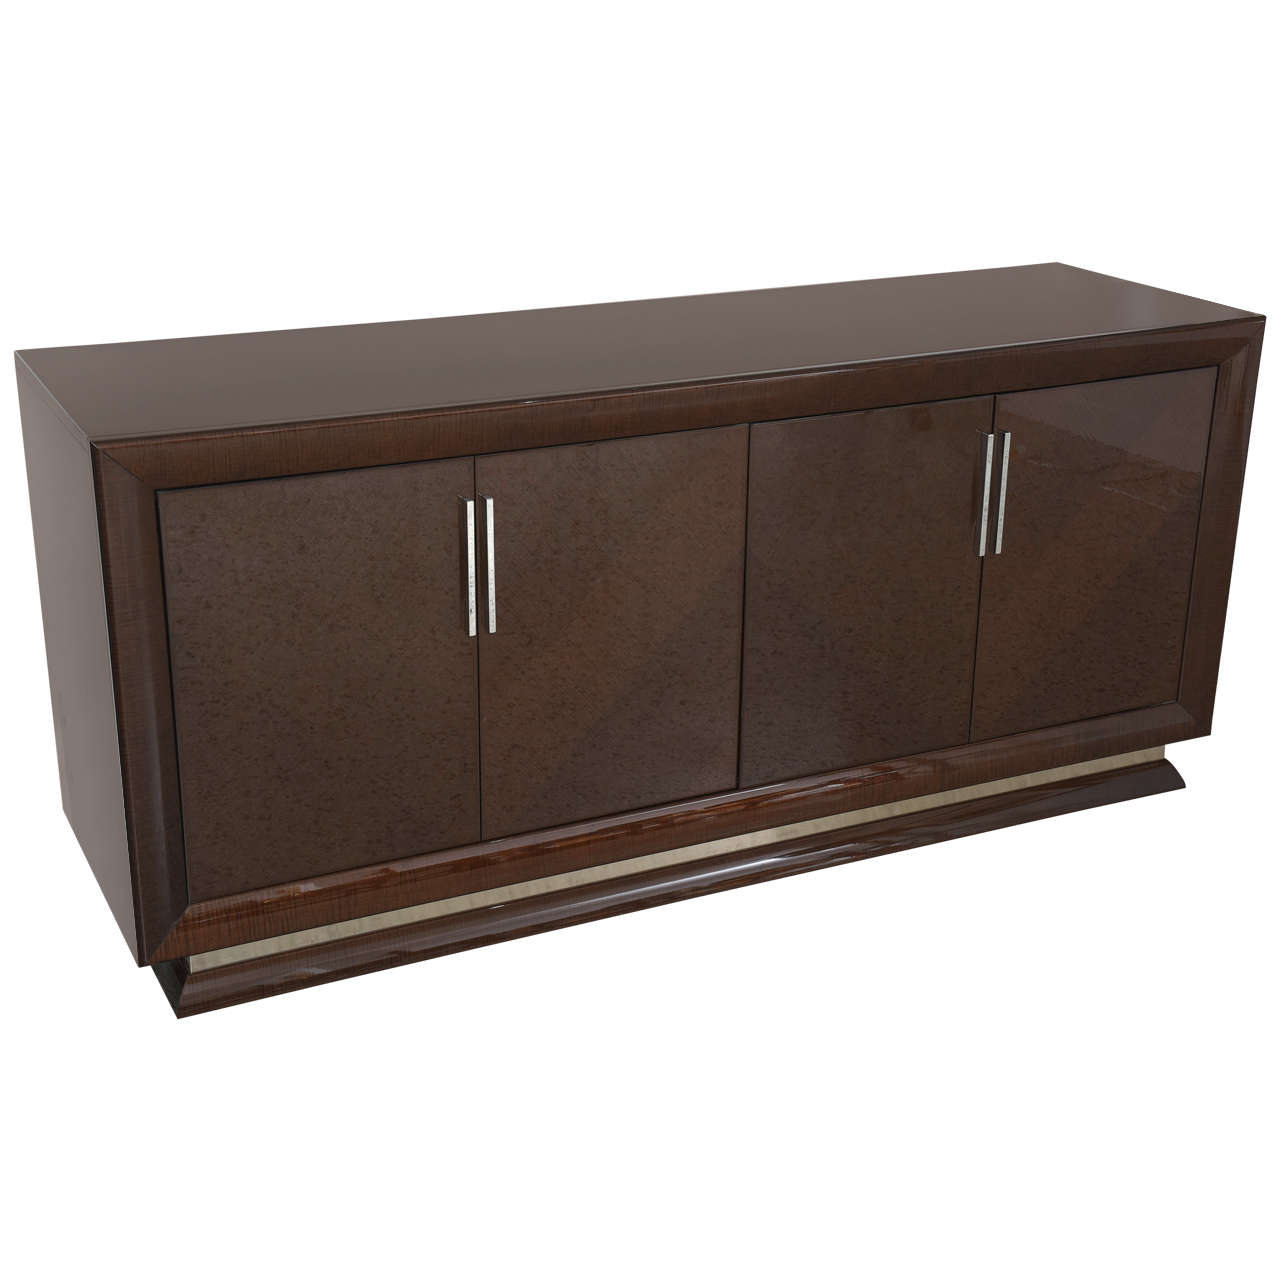 Art Deco Style Italian Lacquered Wood Credenza or Buffet